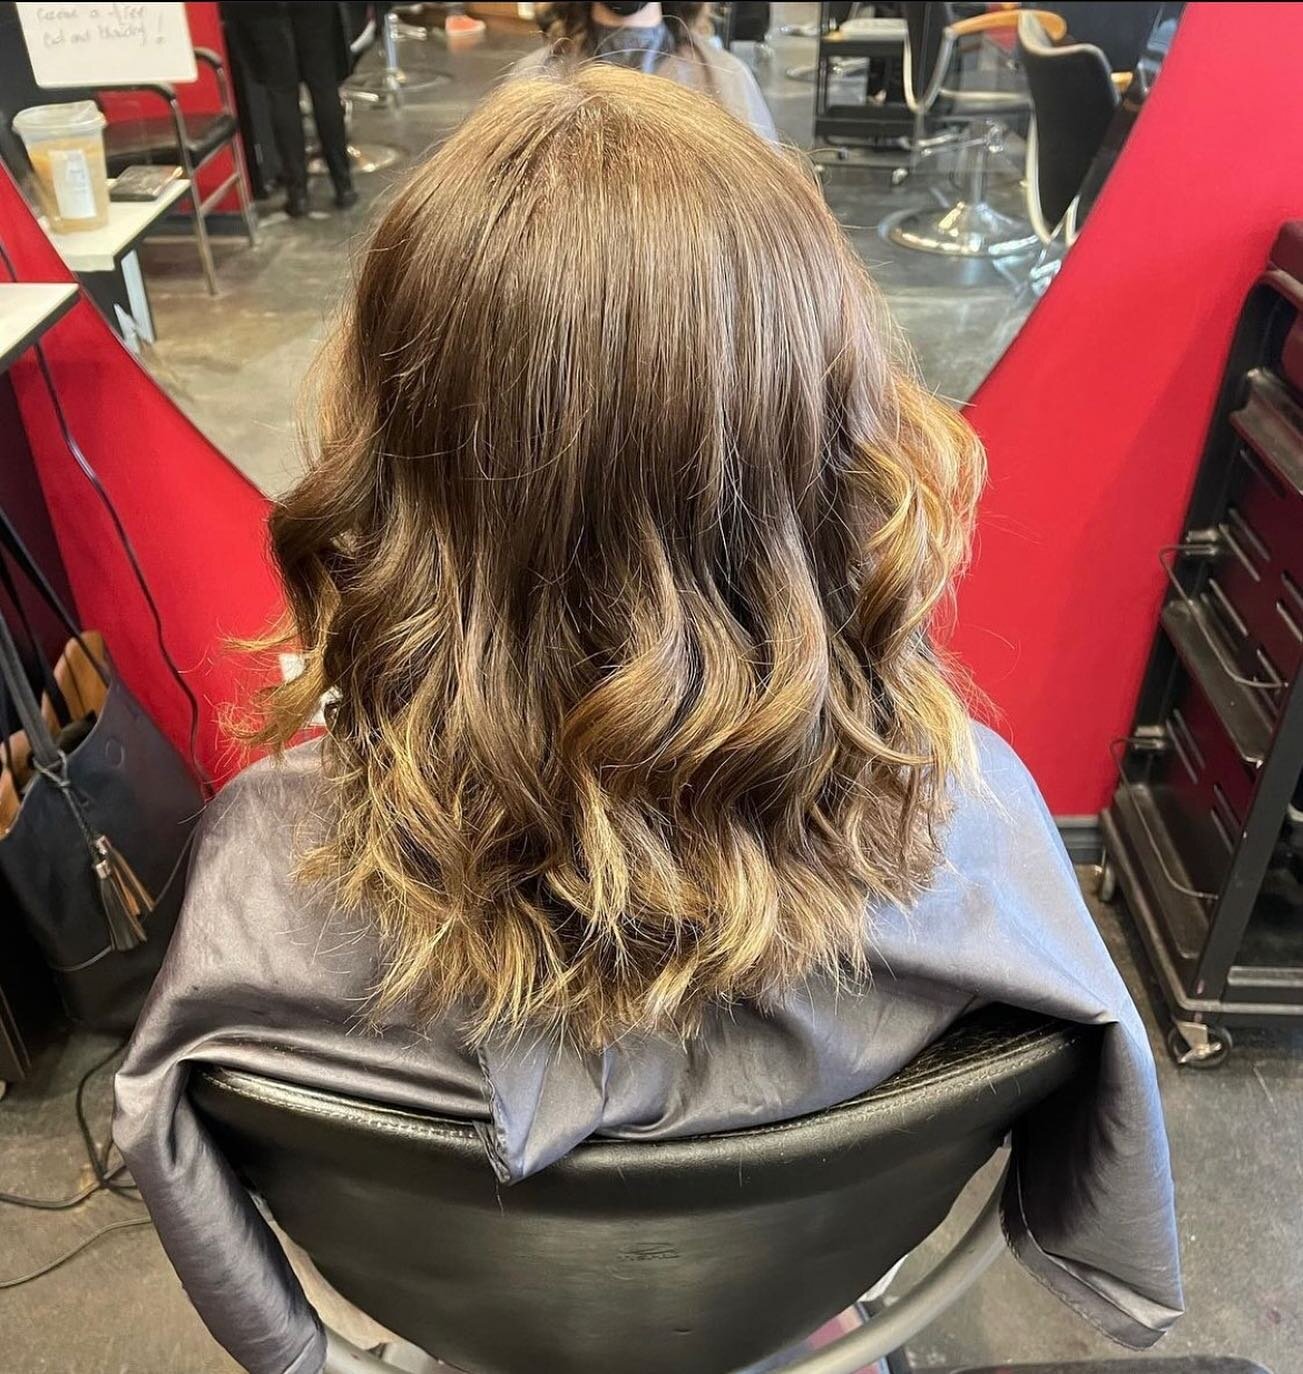 Time to cut off that grown out summer hair! We have appointments available next week for those back to school cuts for everyone! Give us a call at 604-461-5055 to book in! 

cut done by stylist Amy @perfectame.beauty 

#salon #hairsalon #coquitlam #c